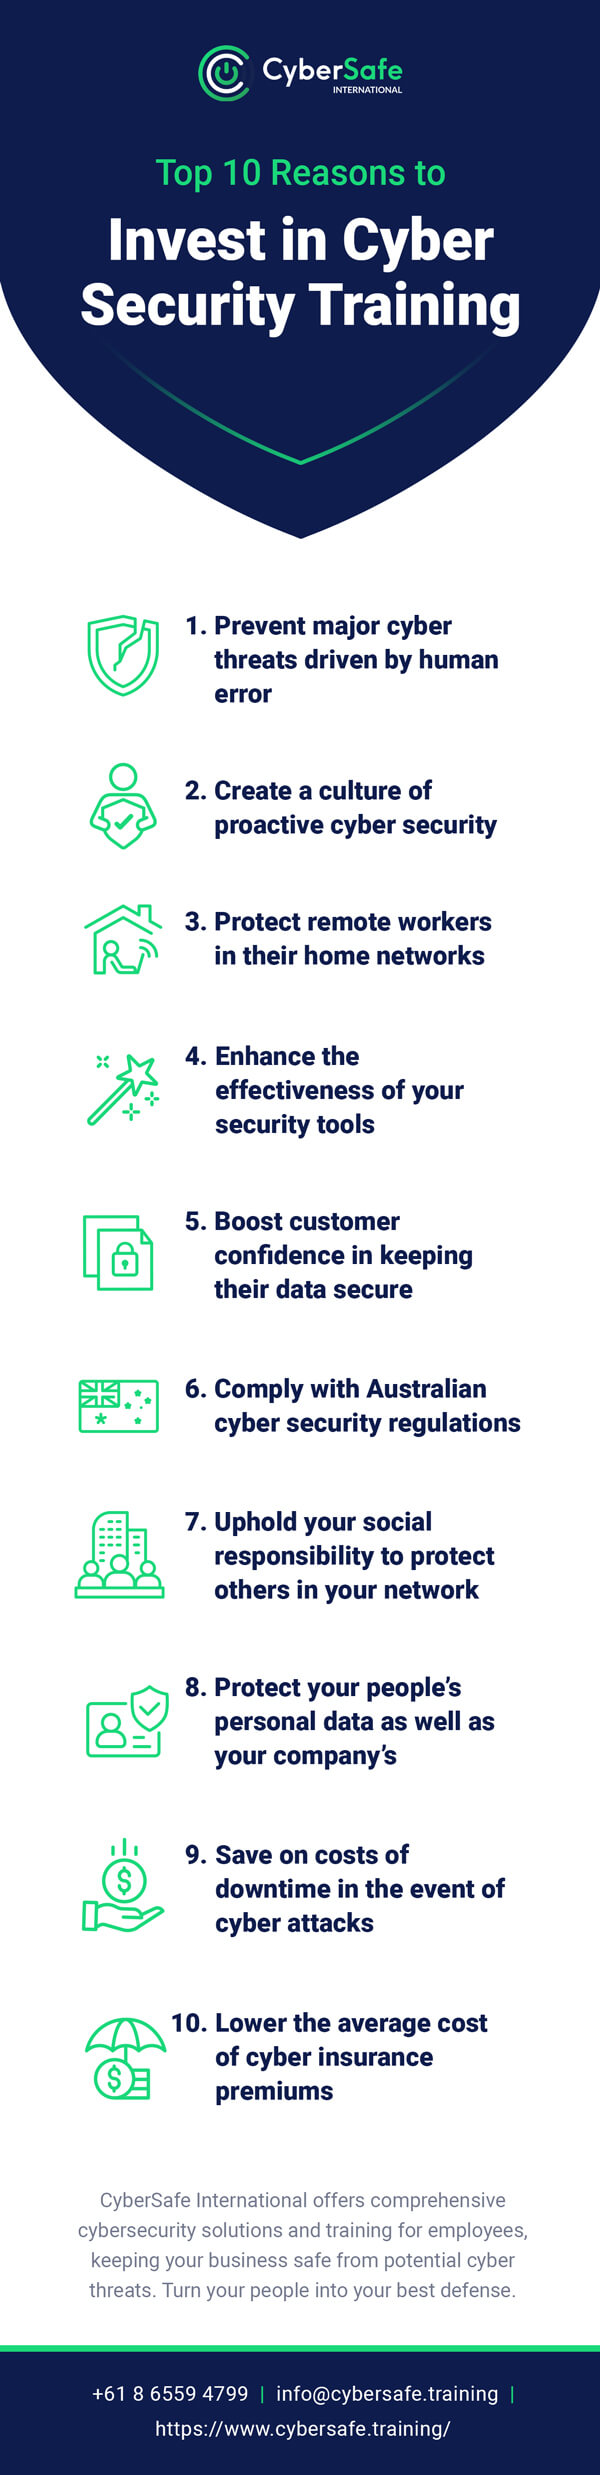 Infographic explaining the top 10 reasons to invest in cyber security training